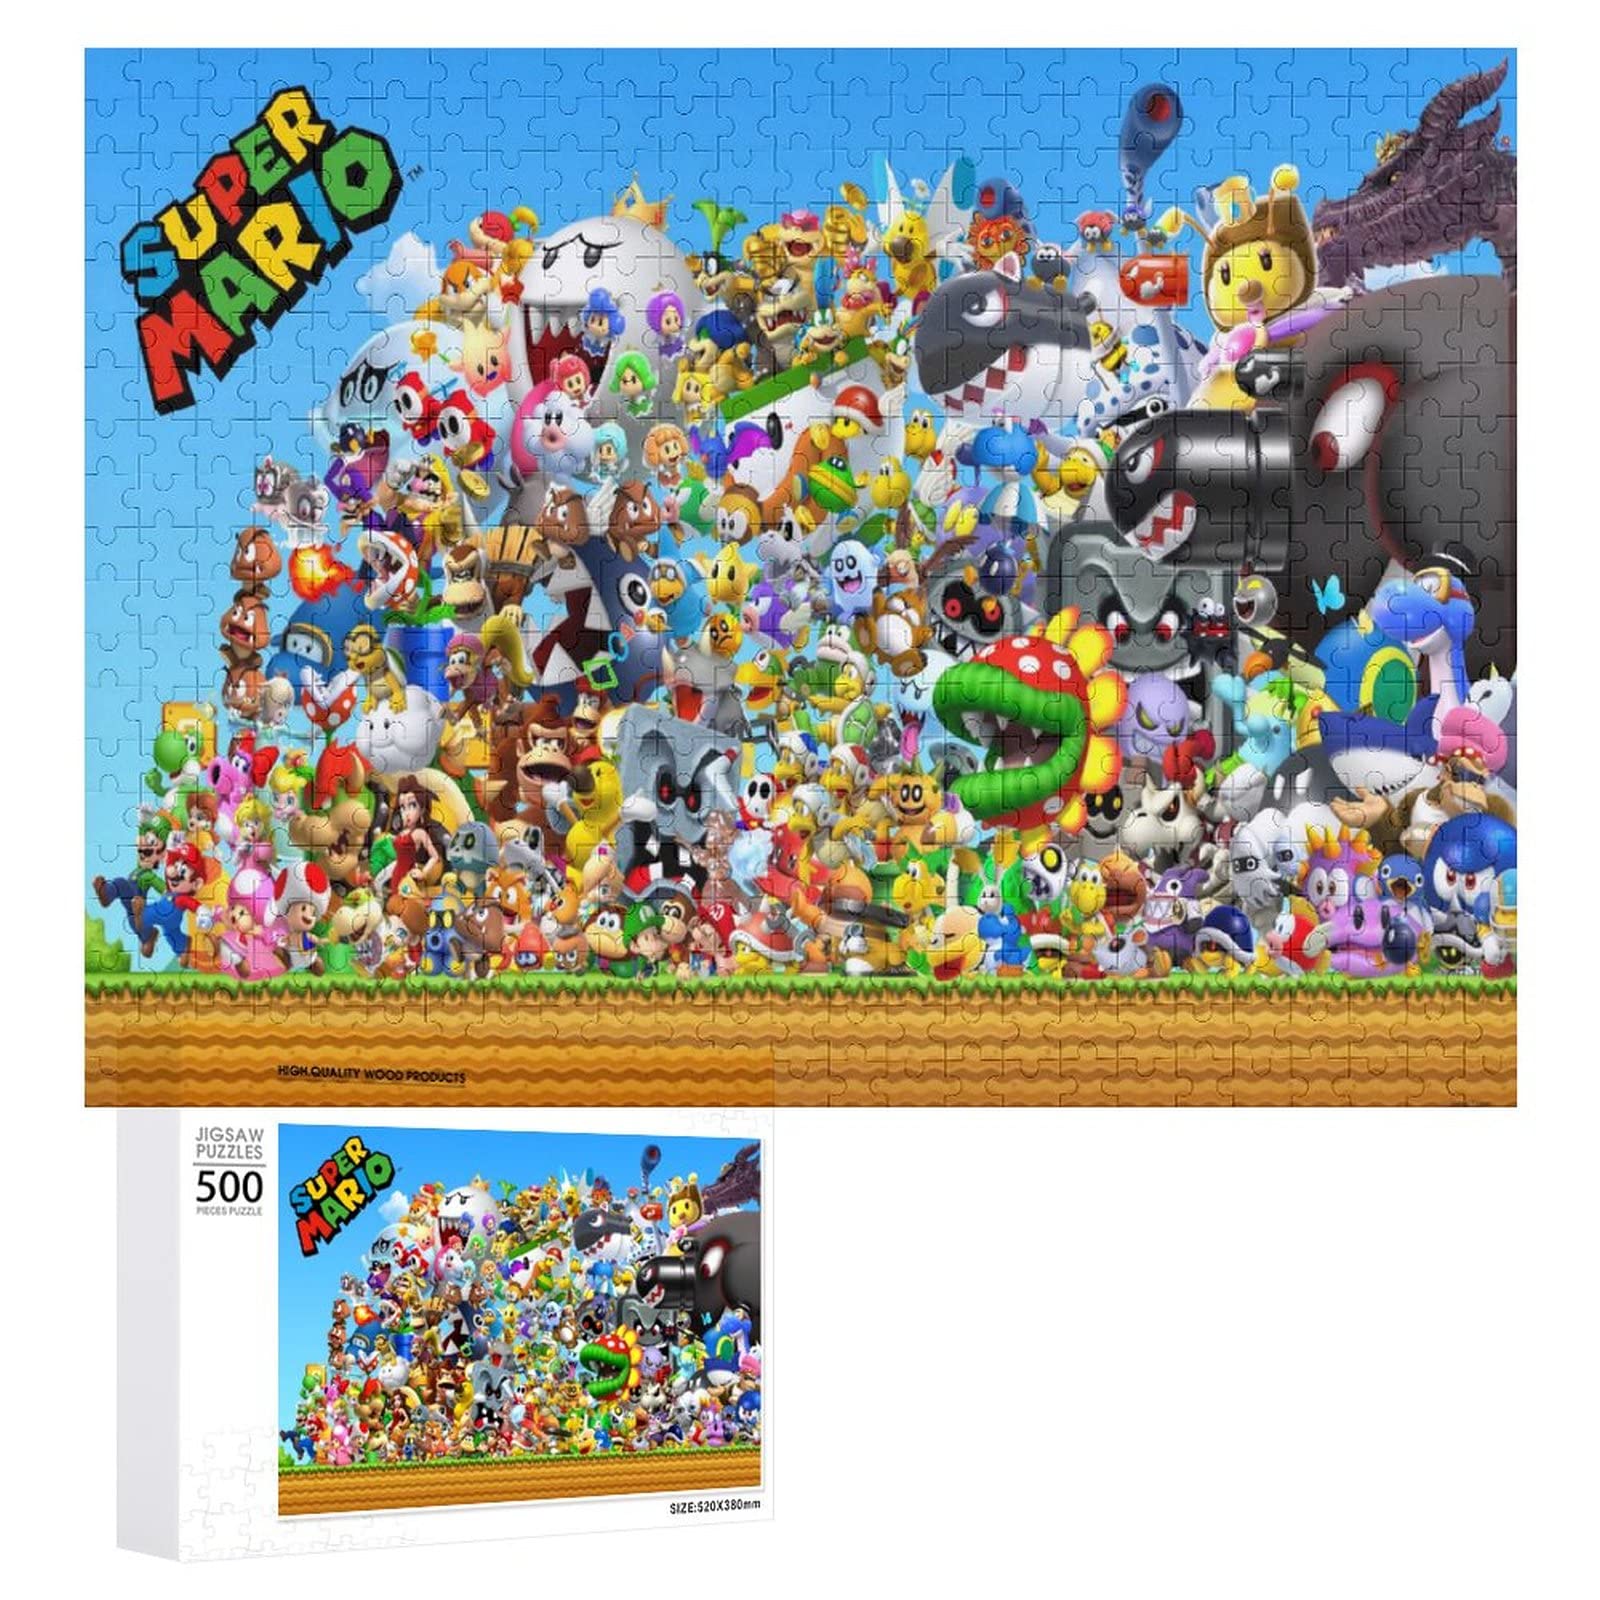 LLGX Super Mario 500 Pieces Jigsaw Puzzles Educational Toys For Kids M